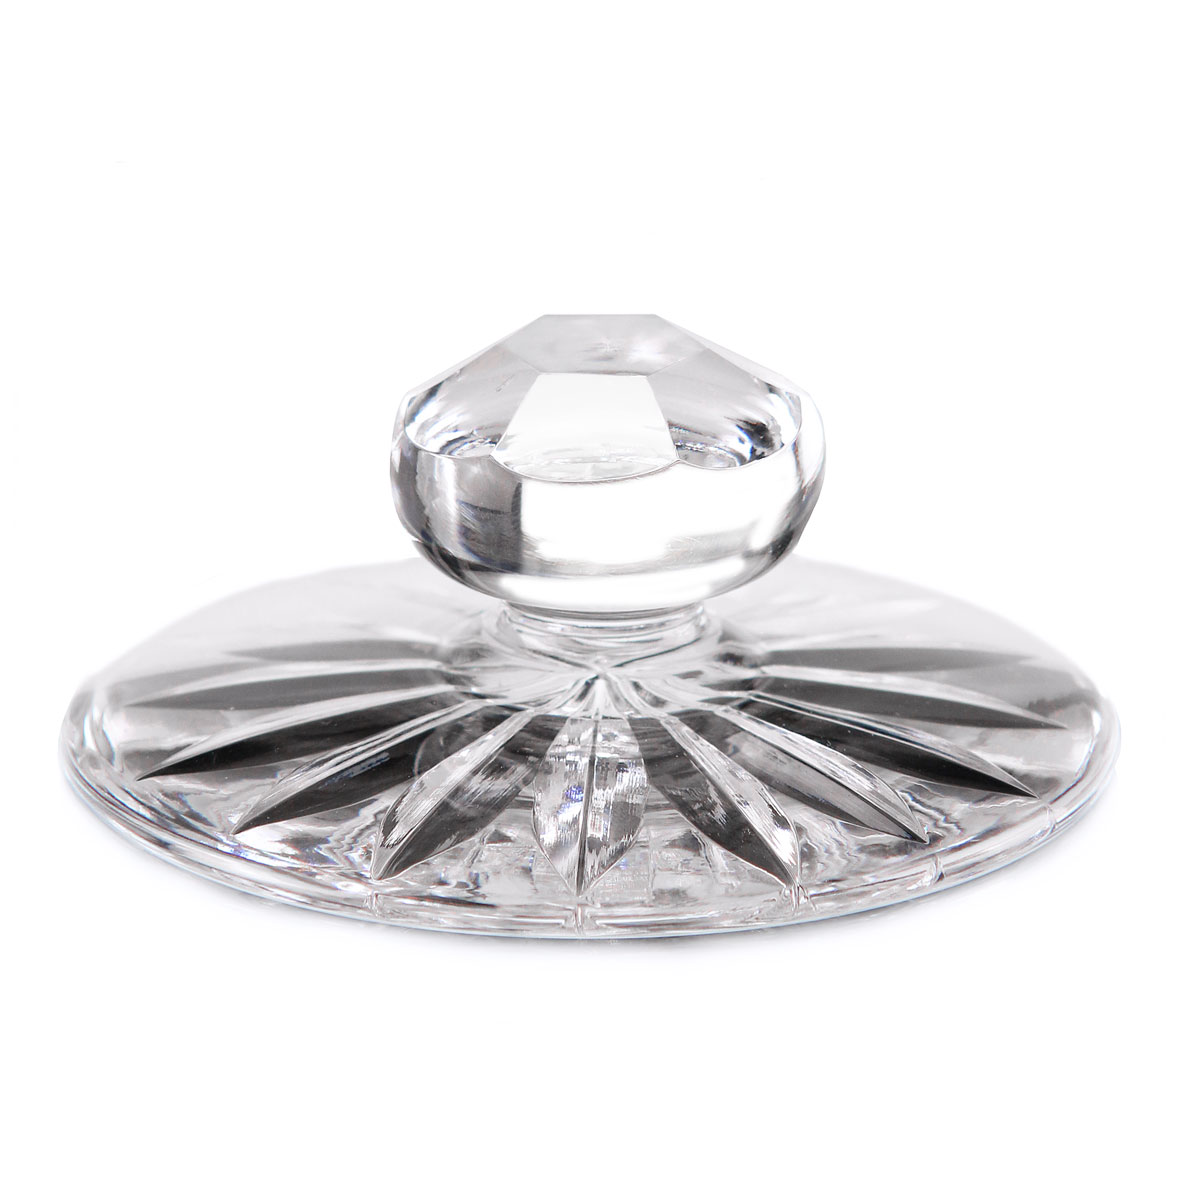 Waterford Crystal, Biscuit Barrel Lid Only